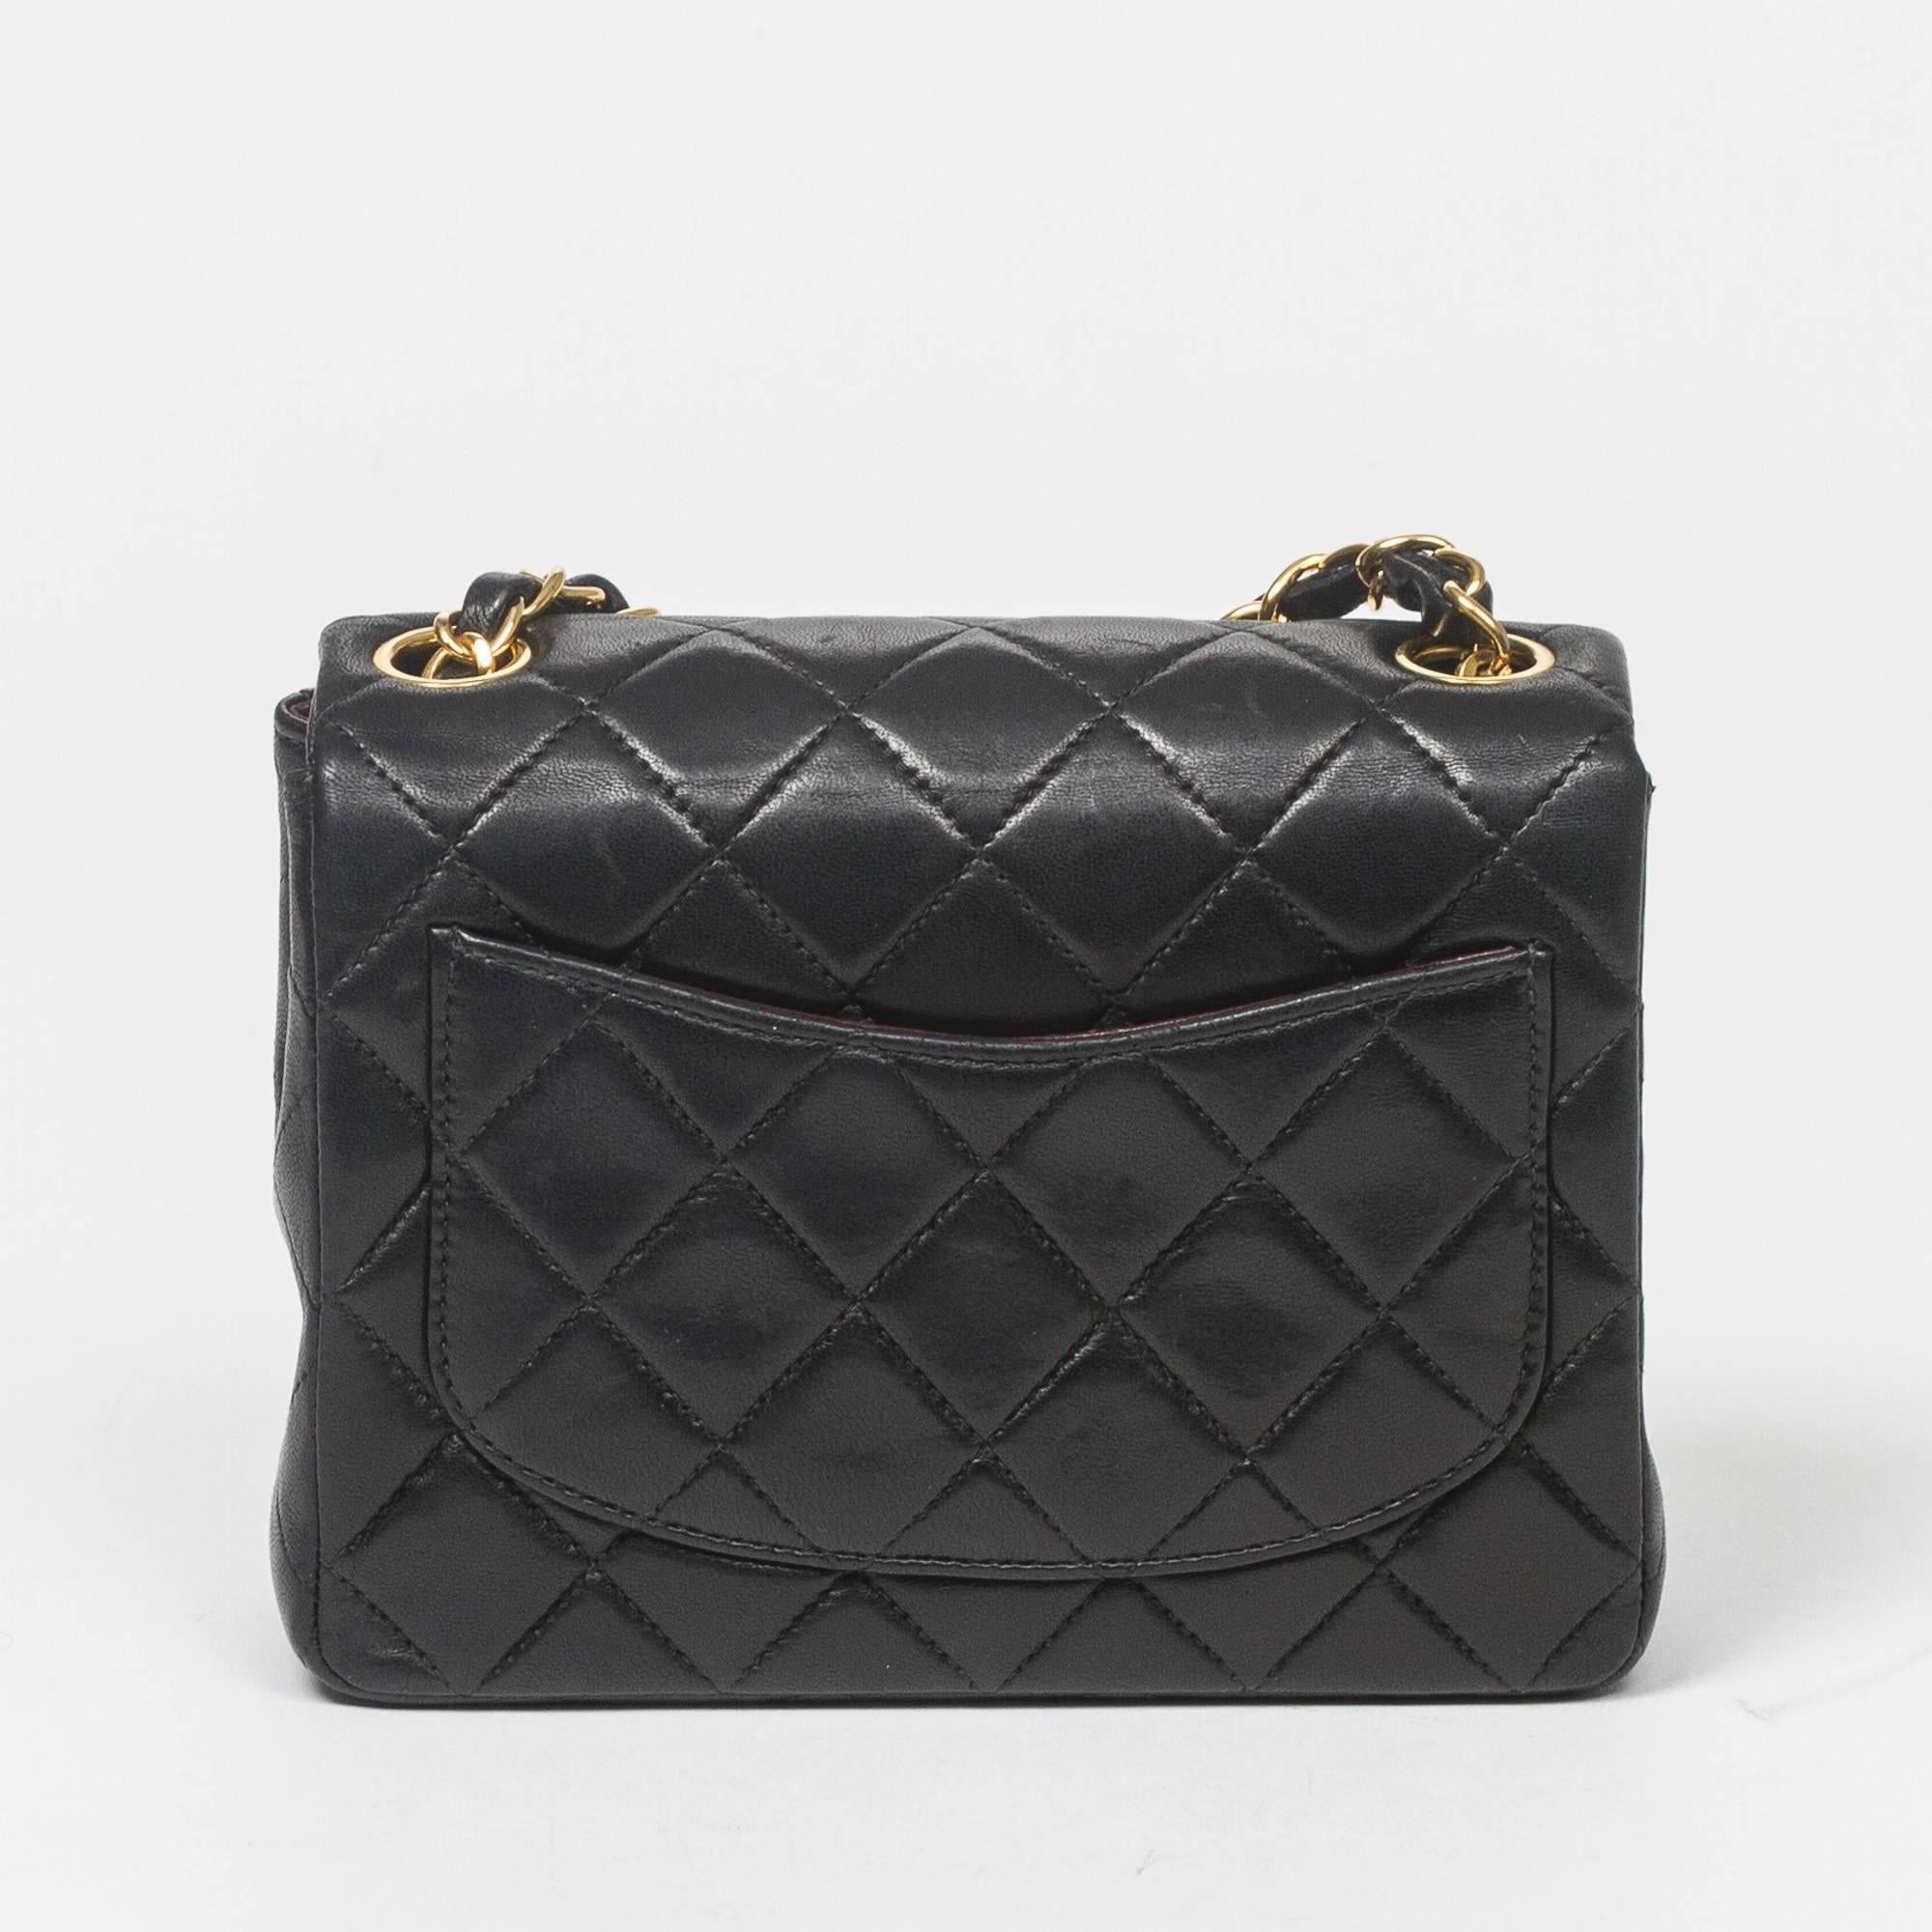 Chanel - Classic Mini Flap Black Quilted Leather 1